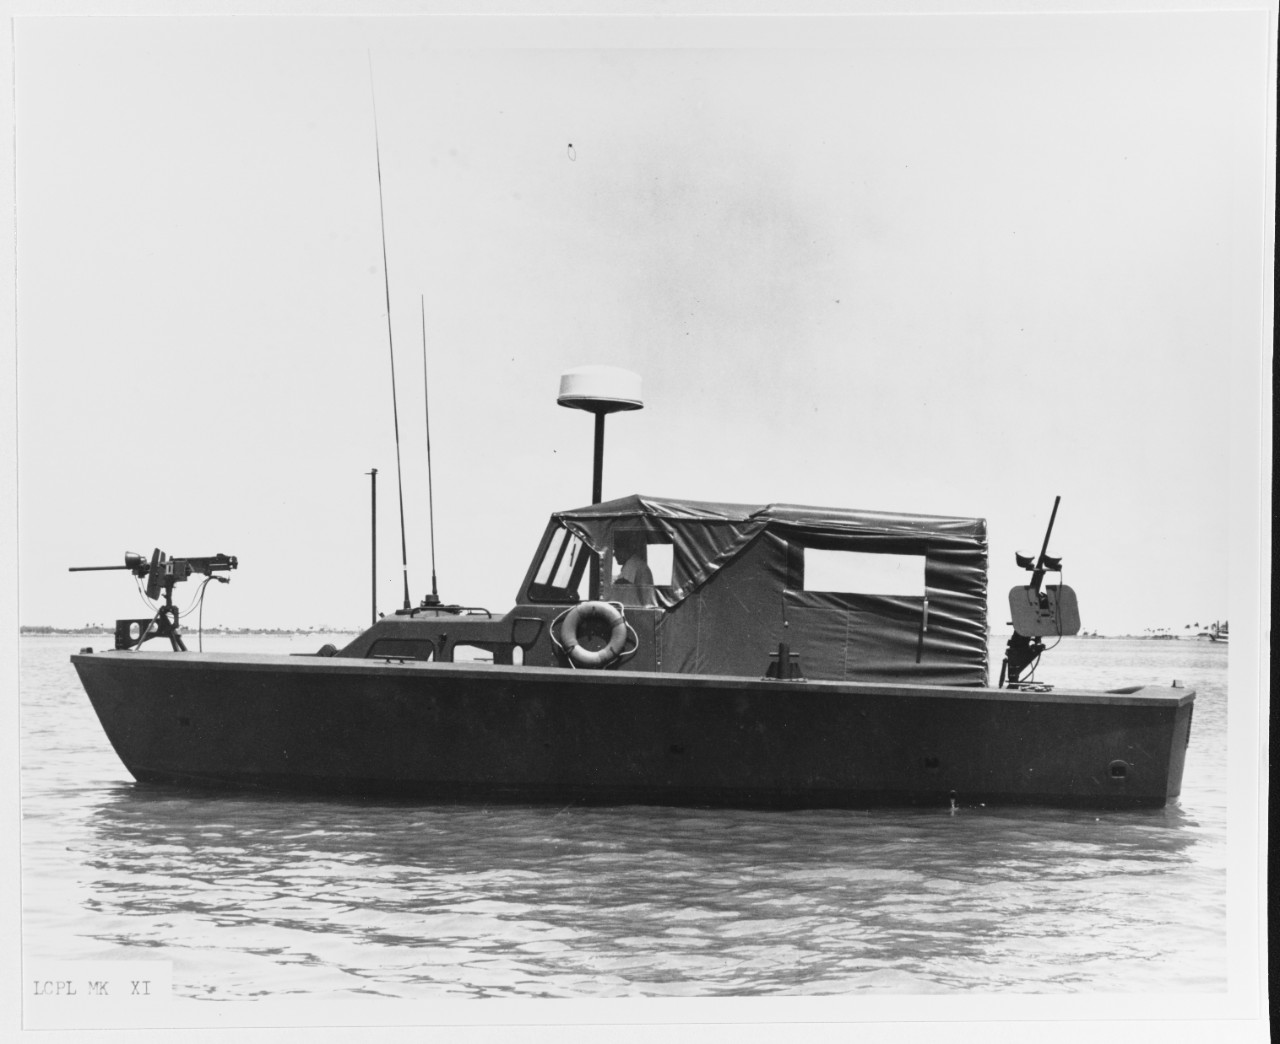 36-foot landing craft personnel ( Large), Mark XI (LCPL)